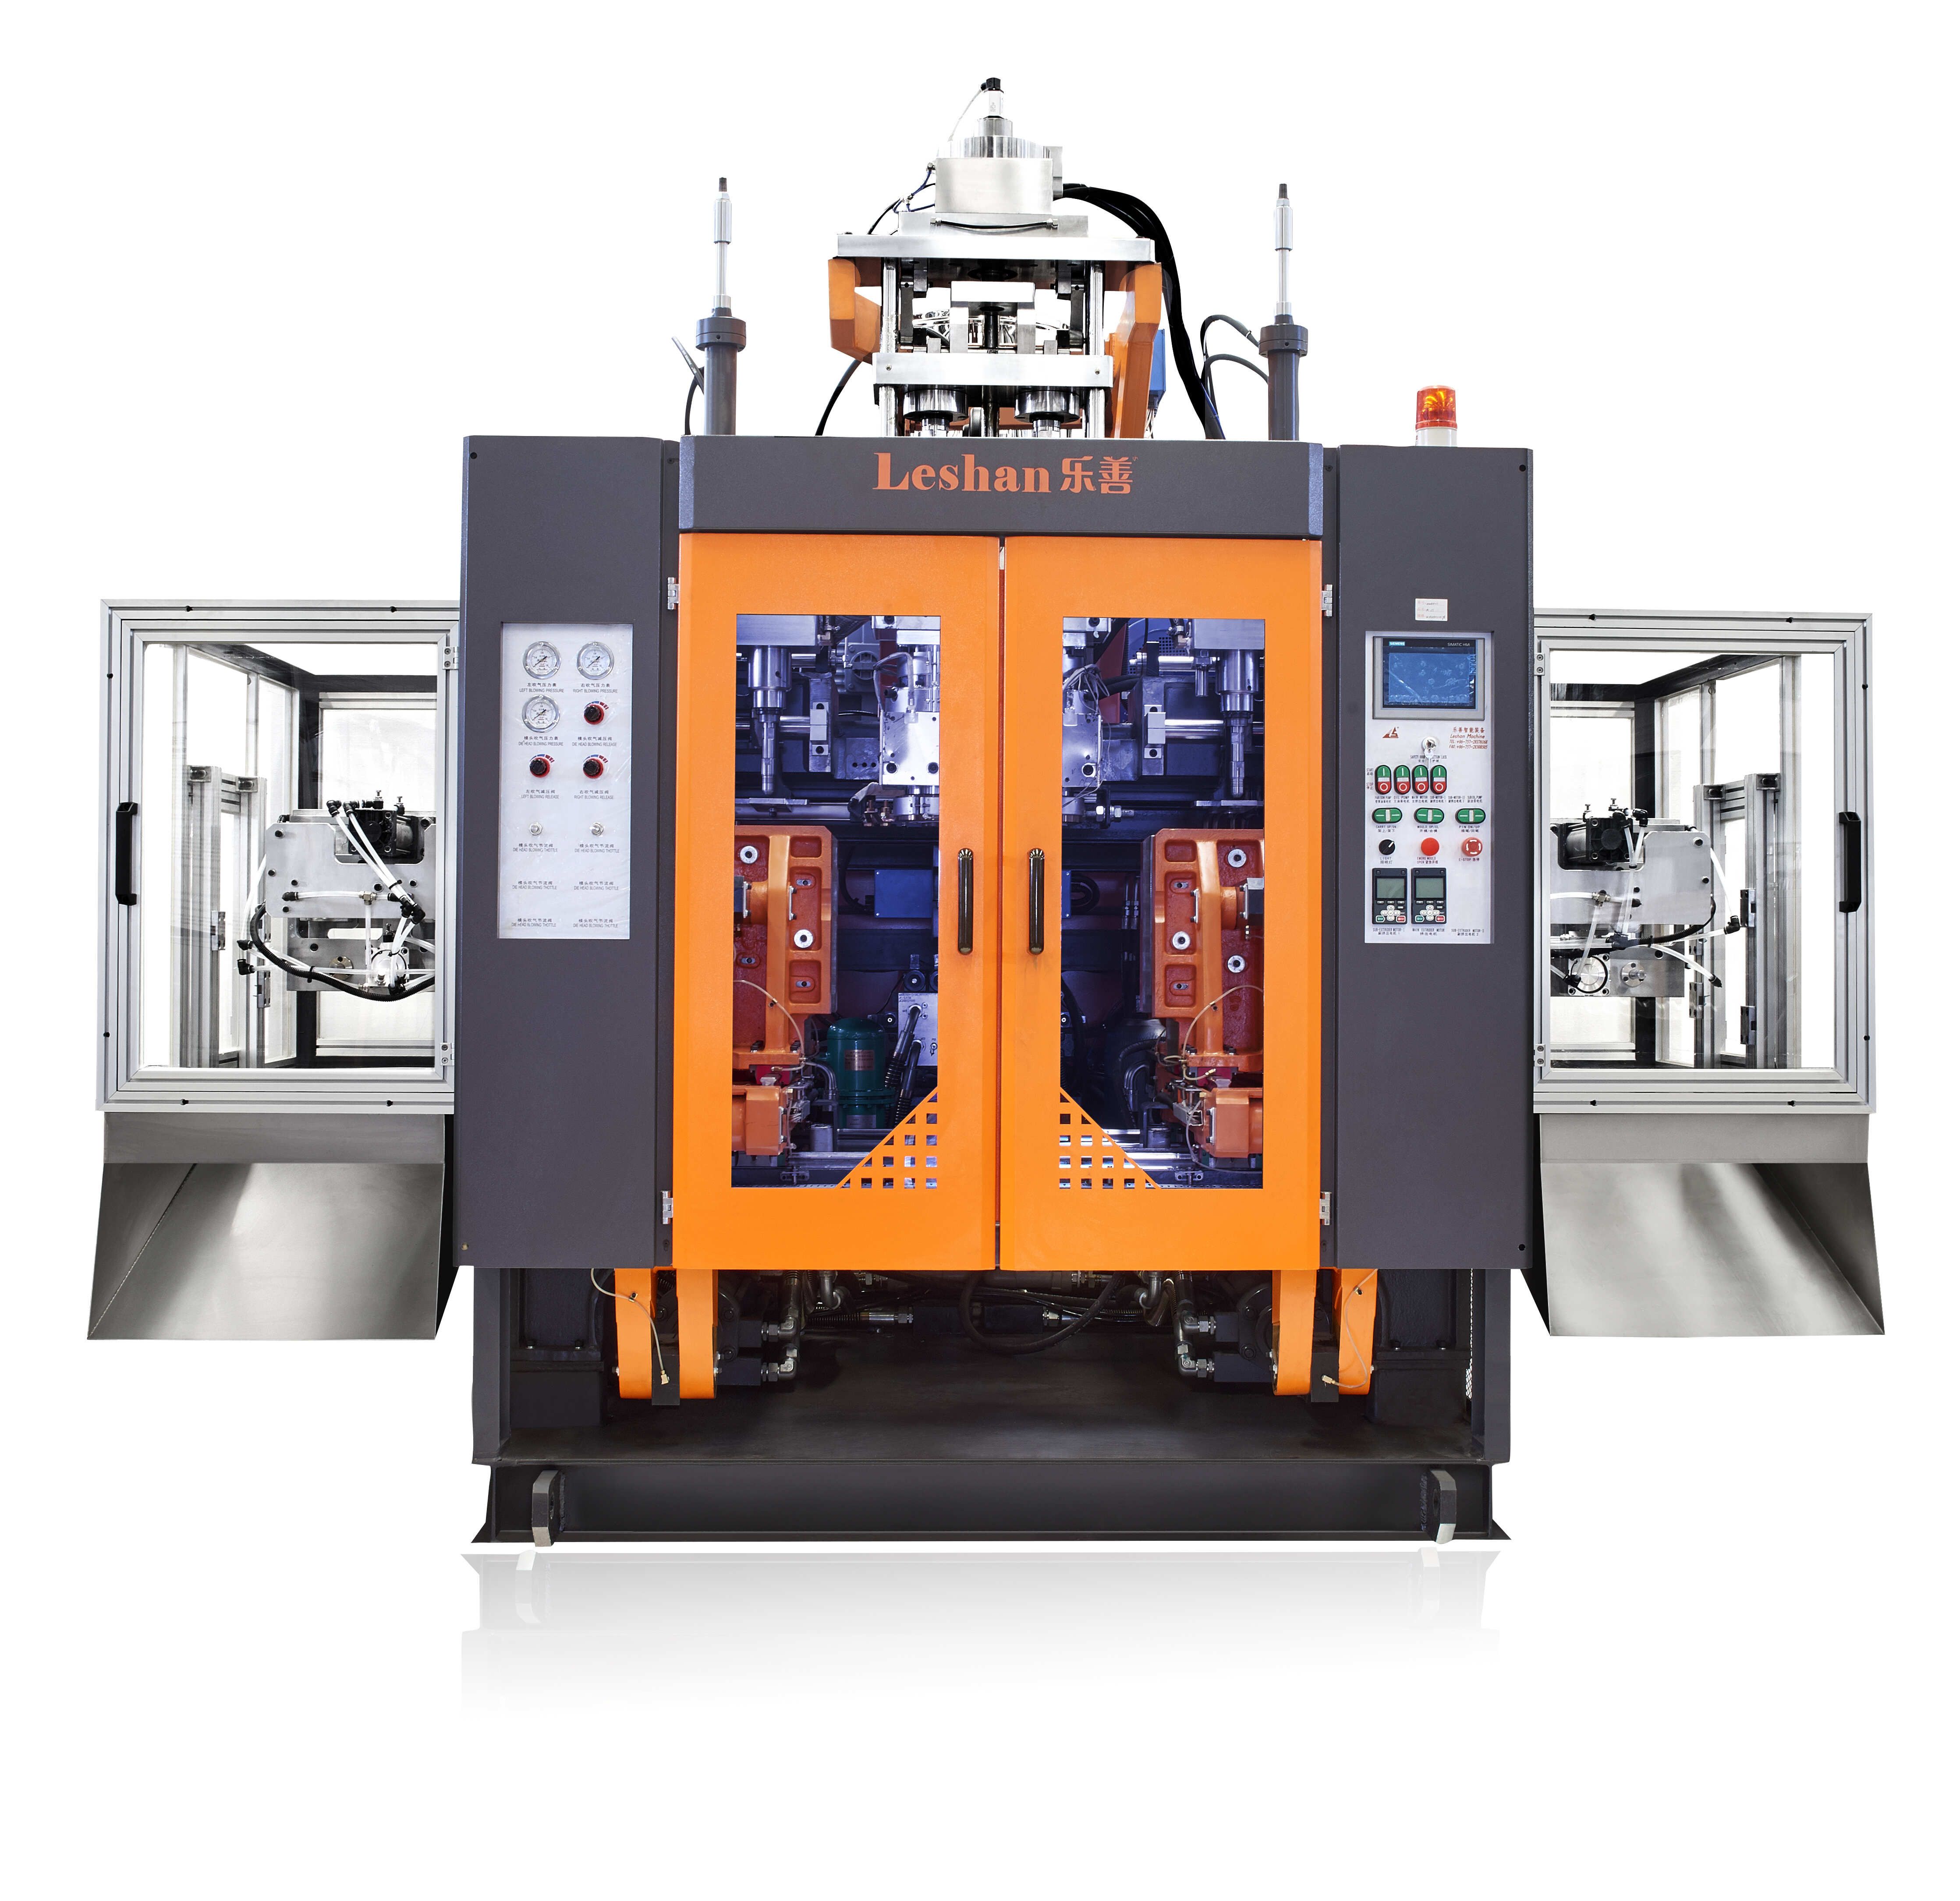 How to prevent air leakage in extrusion blow molding equipment?